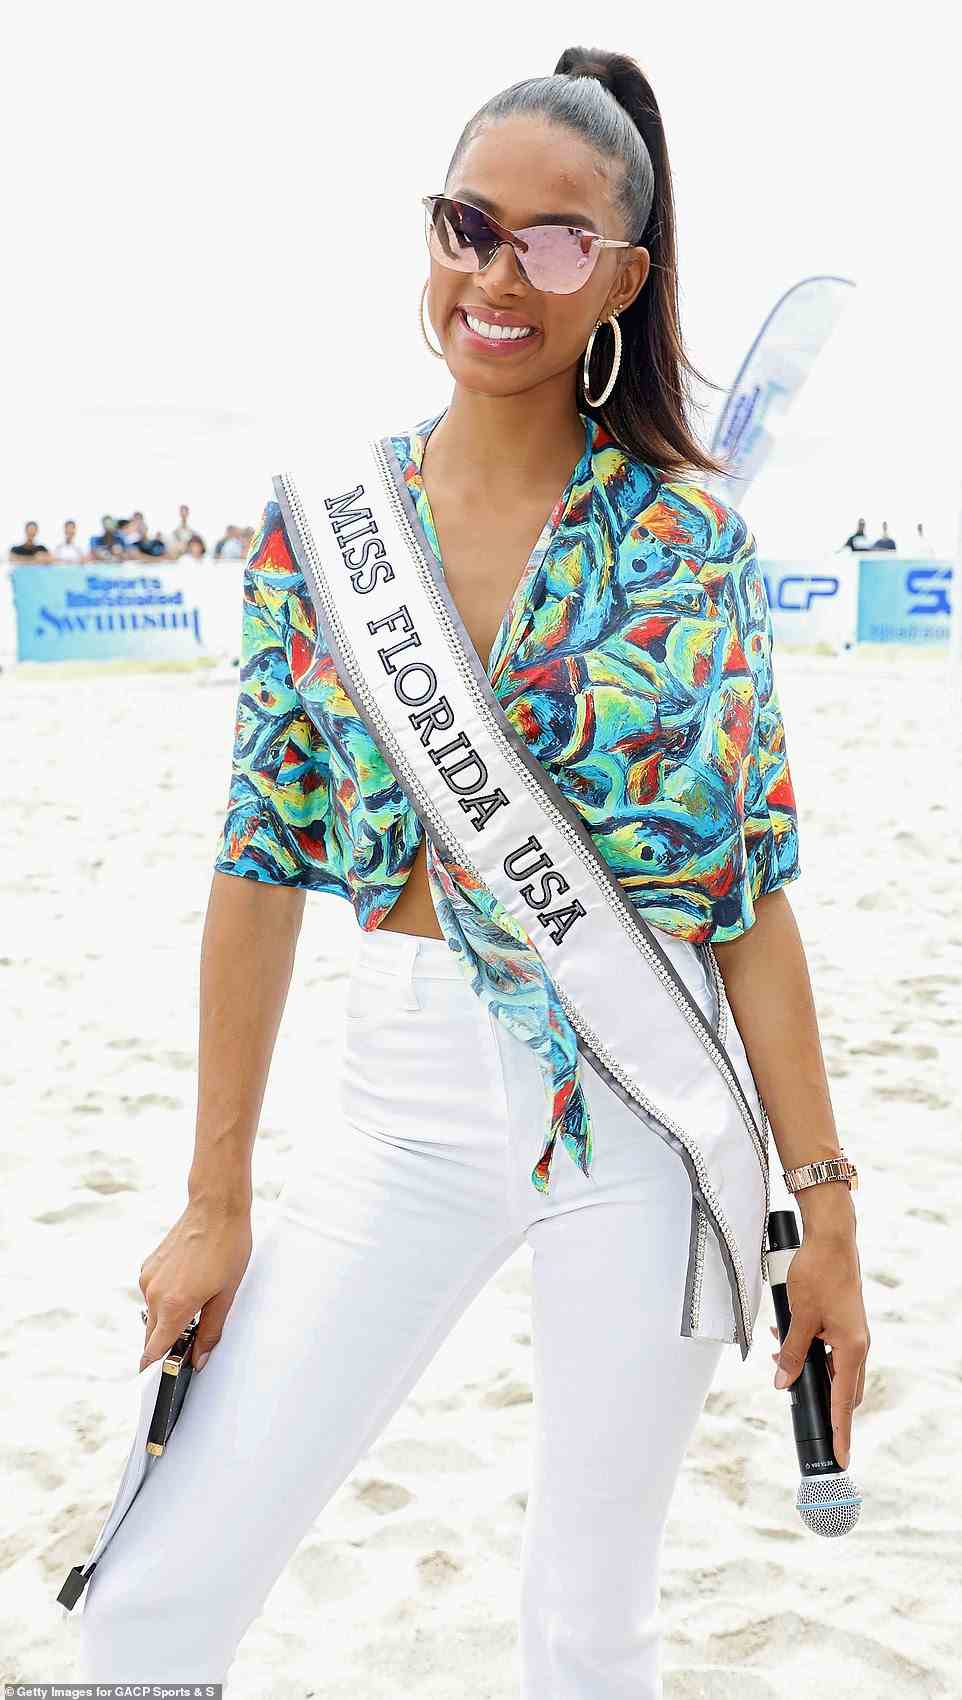 Genesis Davila, now 31, was crowned as Miss Florida in 2017 - but the world was left stunned days later when she was stripped of her title and accused of cheating and using a professional hair and makeup team - which is strictly prohibited